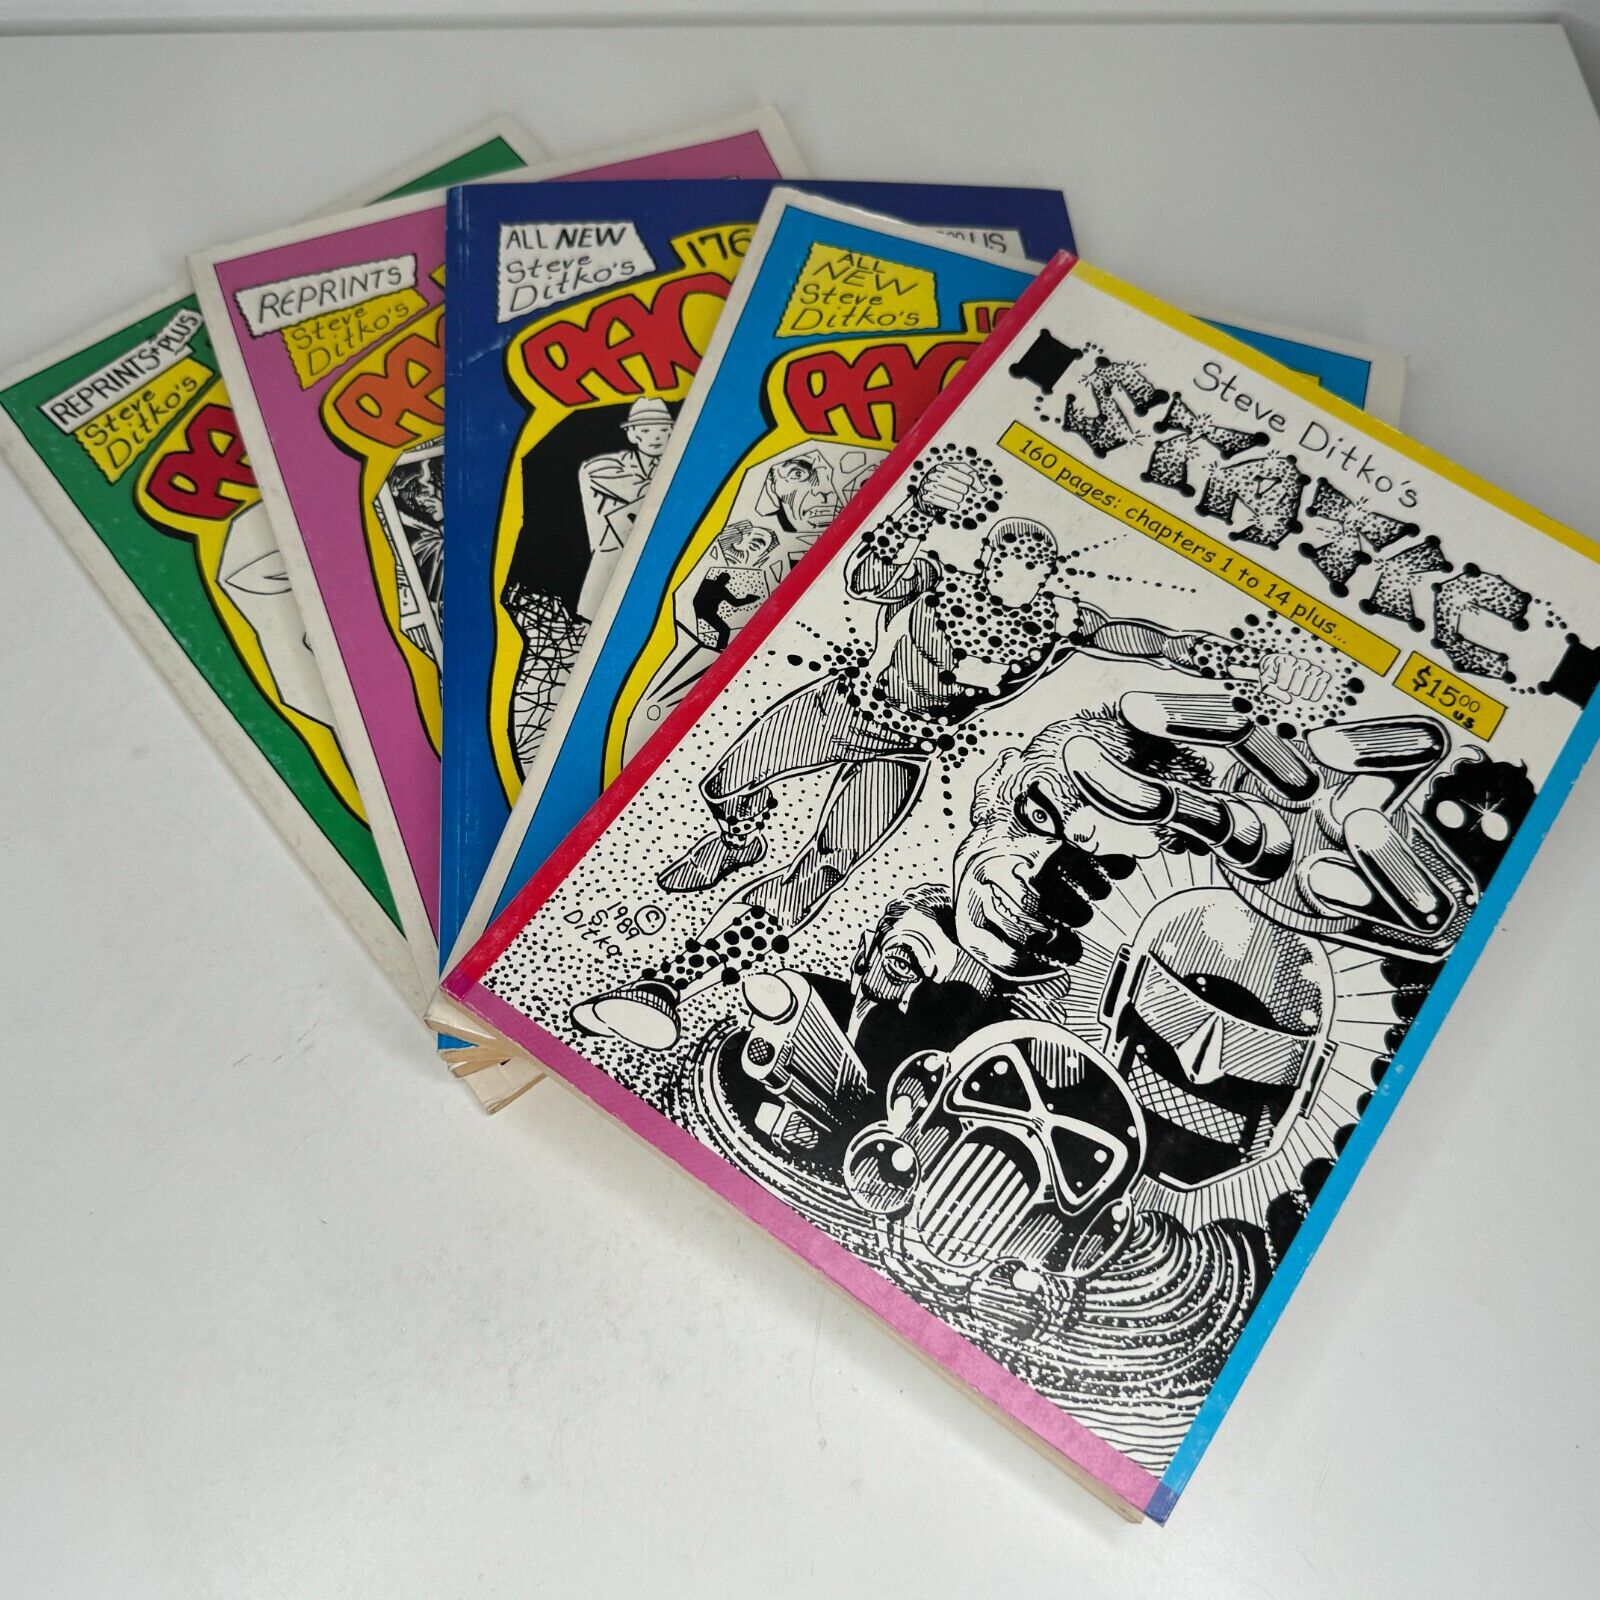 Steve Ditko\'s Bundle Comic Books Lot of 5 books - Static and Issues 1-4